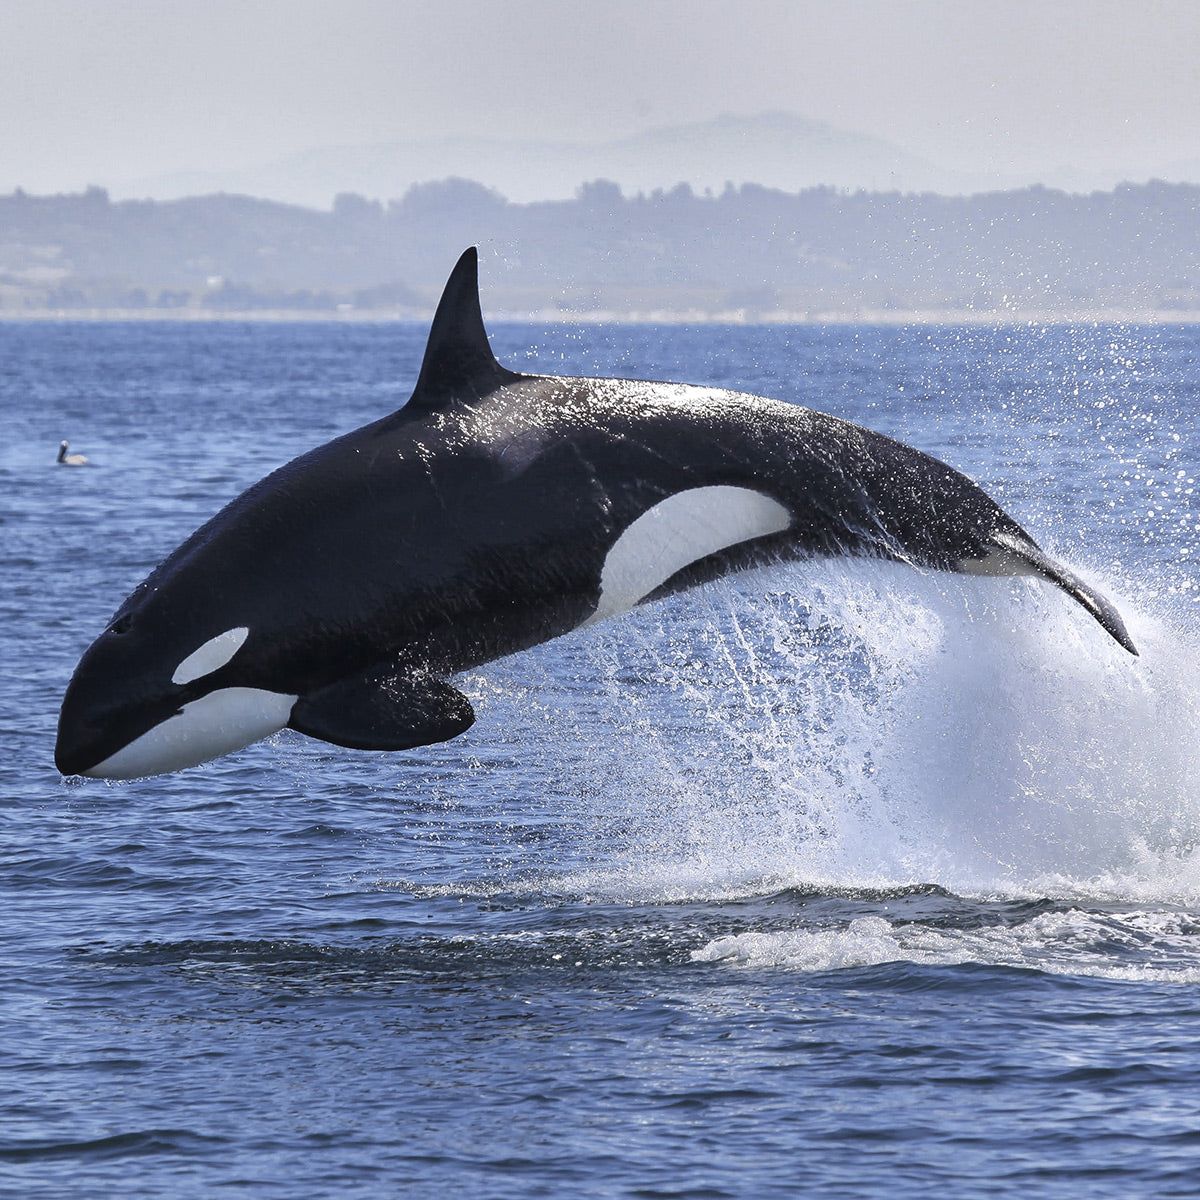 A photo of an orca jumping out of the water